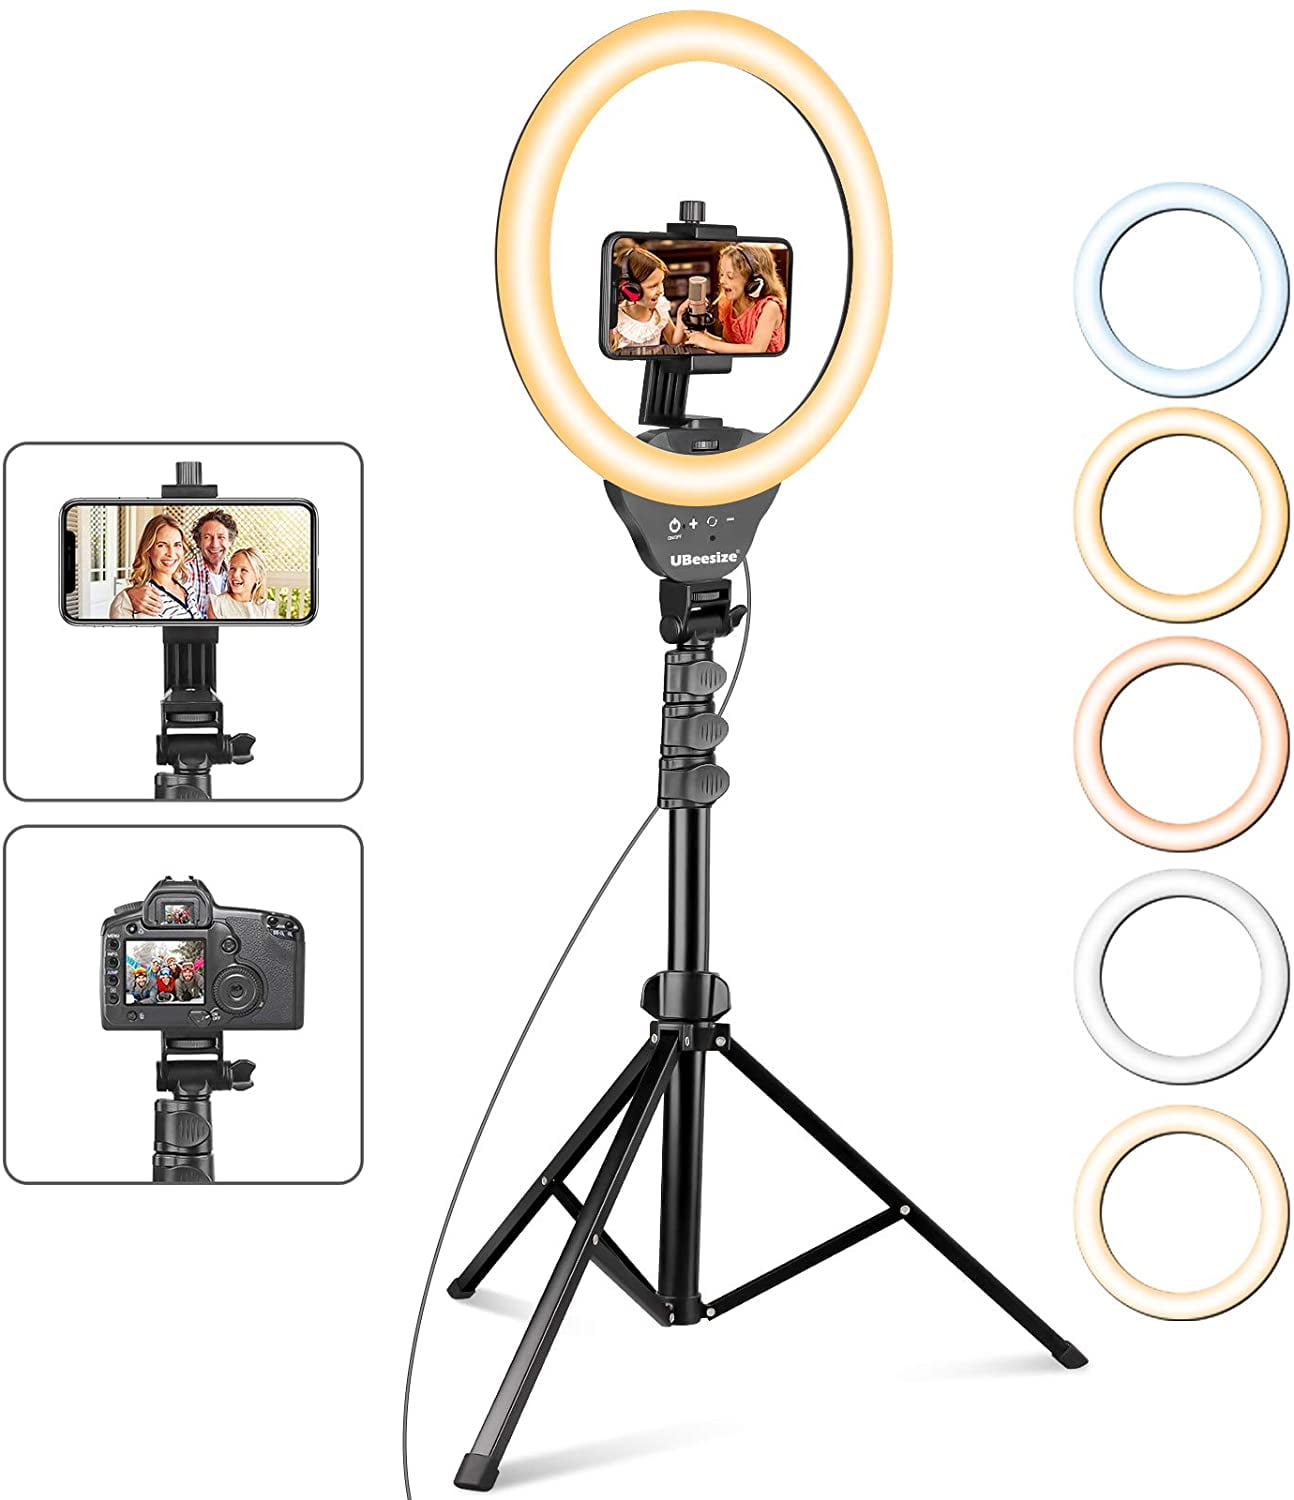 Black UBeesize Selfie Ring Light with Tripod Stand 